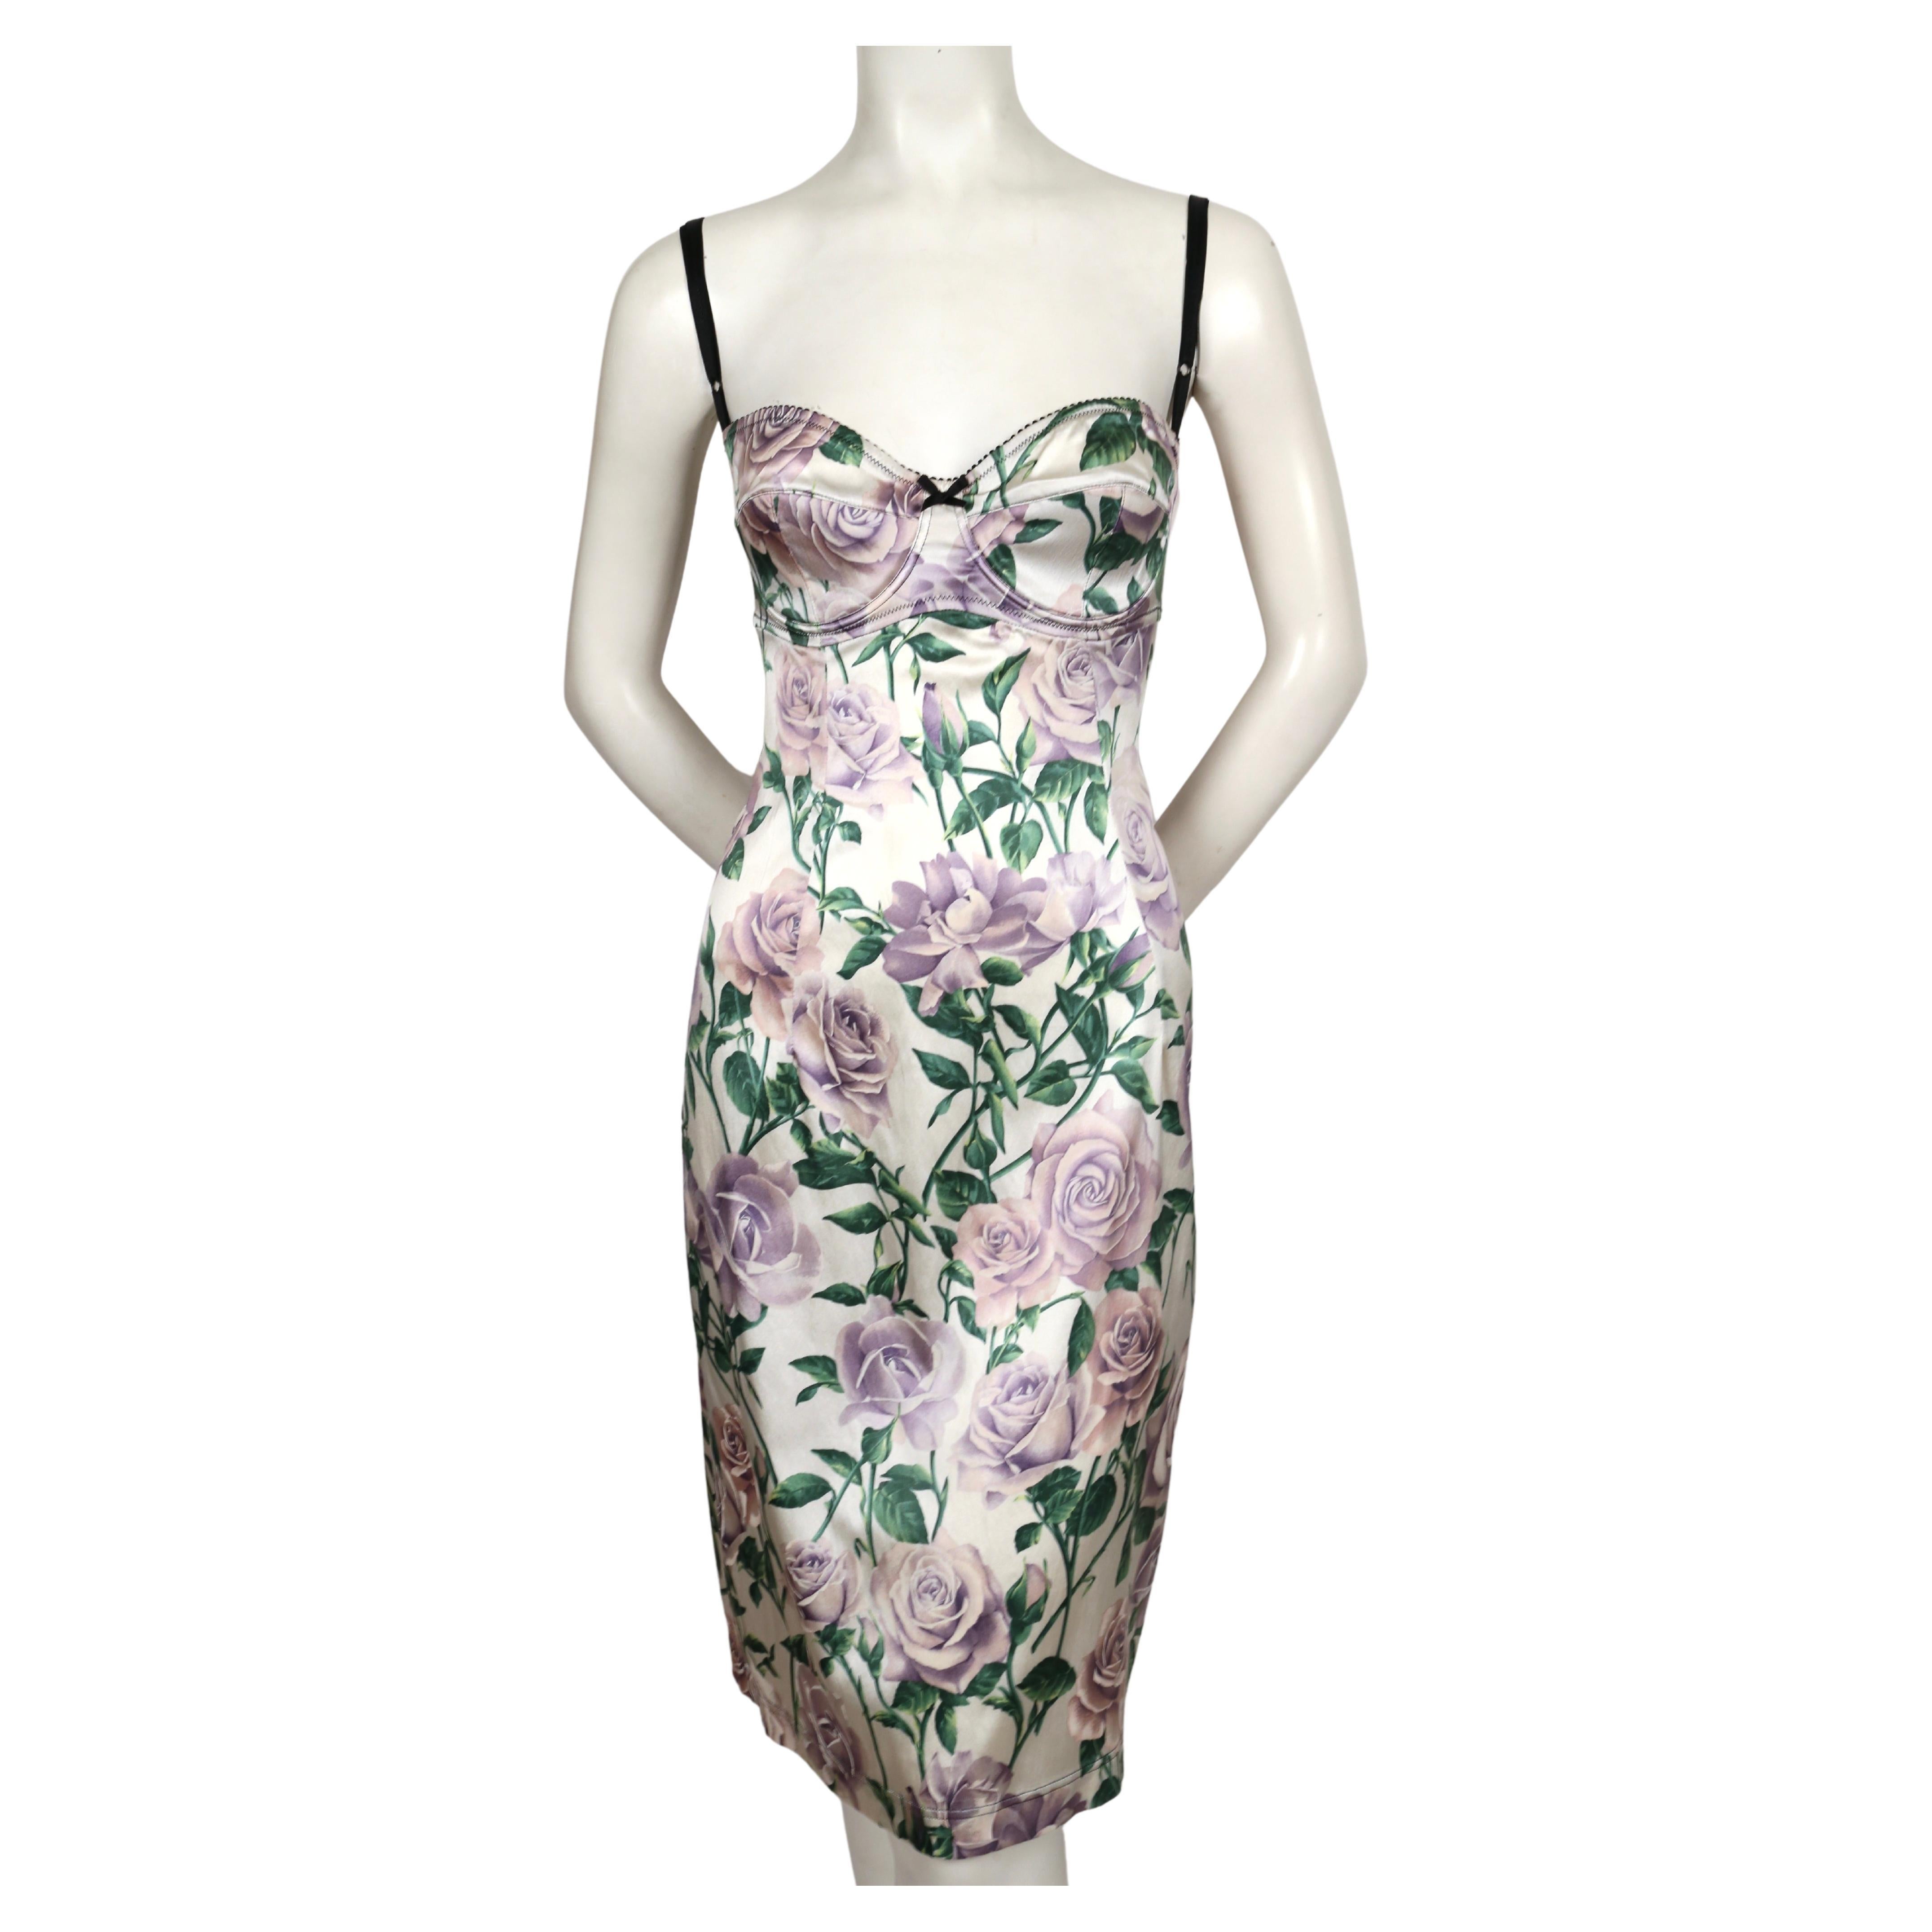 Silk floral printed bustier dress designed by Dolce & Gabbana dating to the late 1990's. Italian size 44. Approximate measurements: 34